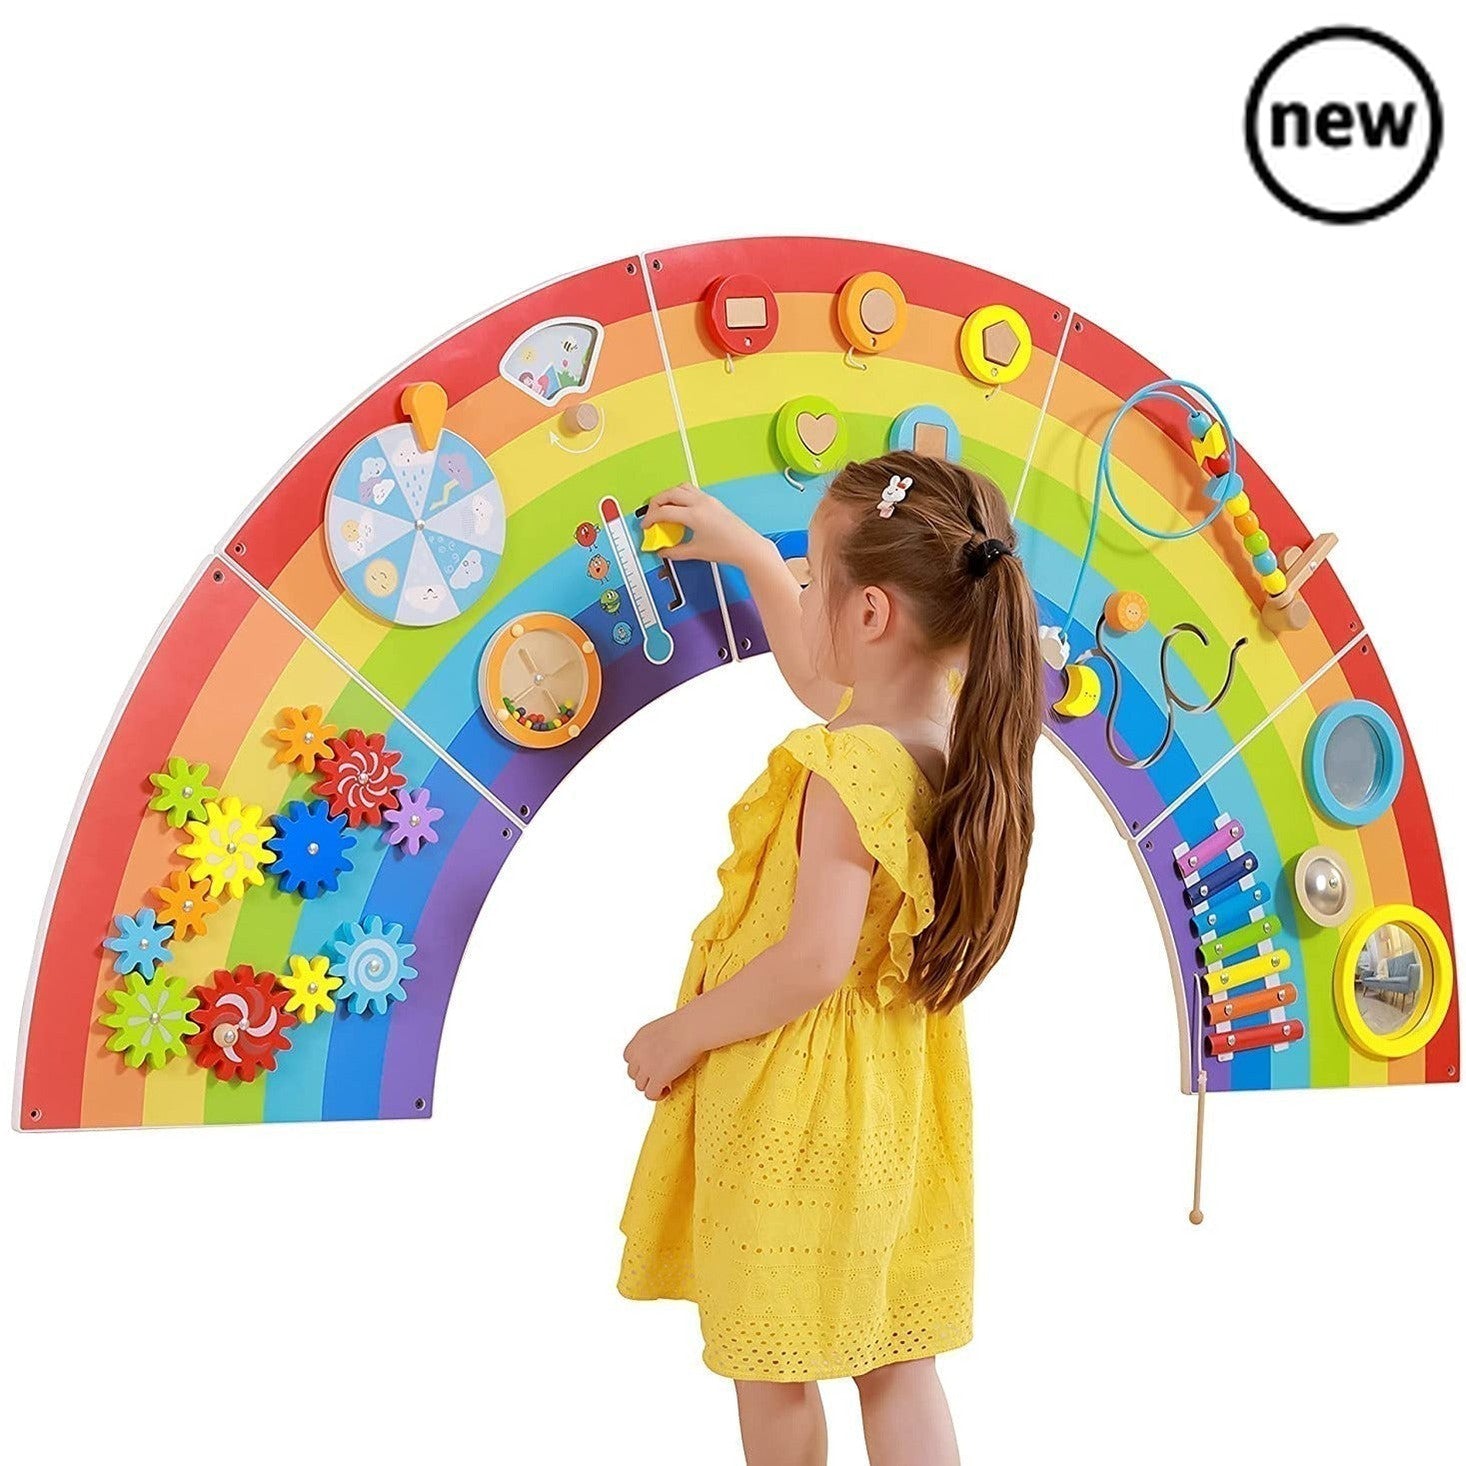 Activity Wall Panel Rainbow, =The Activity Wall Panel Rainbow toy is ideal for the wall at home, waiting room, treatment rooms or in your nursery or school. The Activity Wall Panel Rainbow is Ideal for developing hand-eye co-ordination, finger control and fine motor skills. Wall fixings included. The Activity Wall Panel Rainbow also provides problem solving challenges appropriate to young children whilst engaging children in conversations about what they are doing. This activity wall provides a multi-sensor